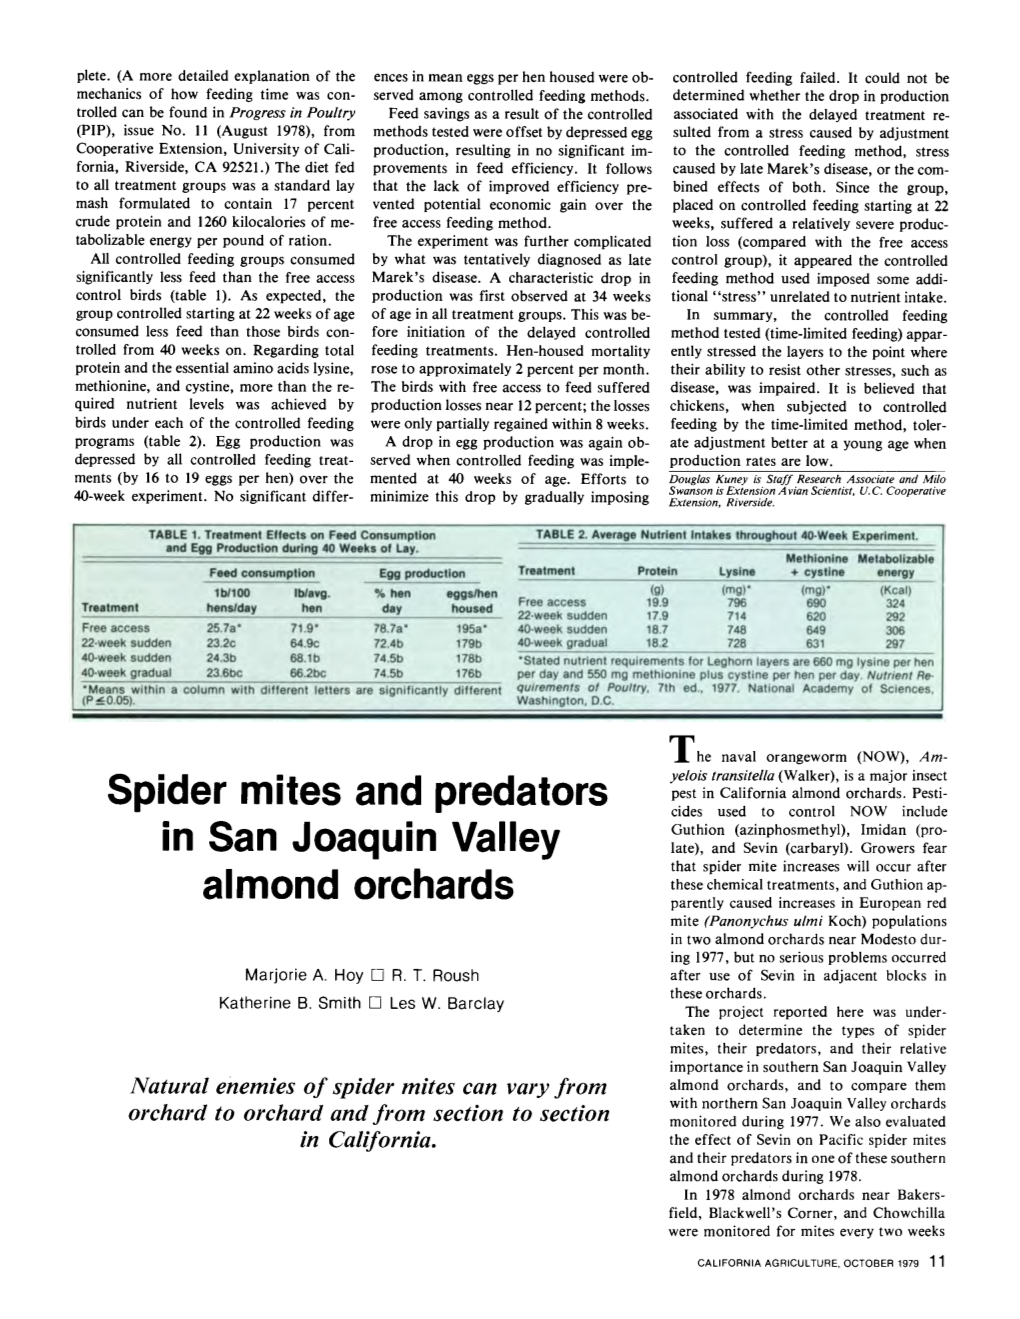 Spider Mites and Predators in San Joaquin Valley Almond Orchards